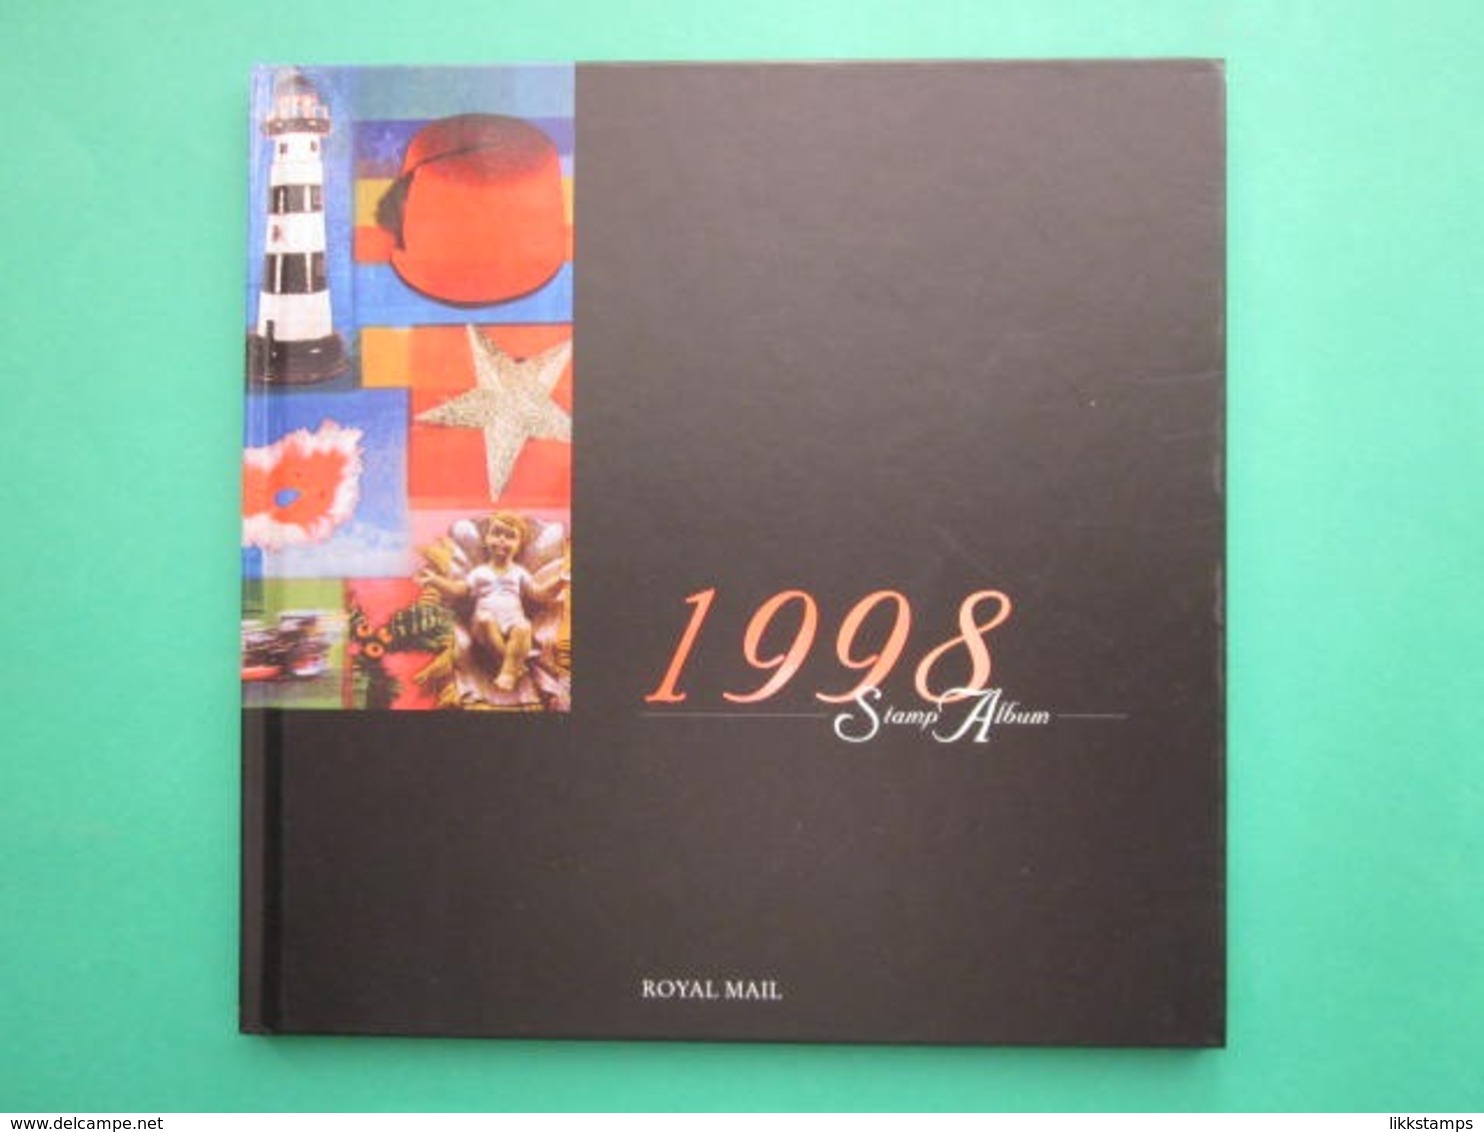 1998 ROYAL MAIL STAMP ALBUM WITH SPACES FOR STAMPS (NOT INCLUDED) - Colecciones (en álbumes)